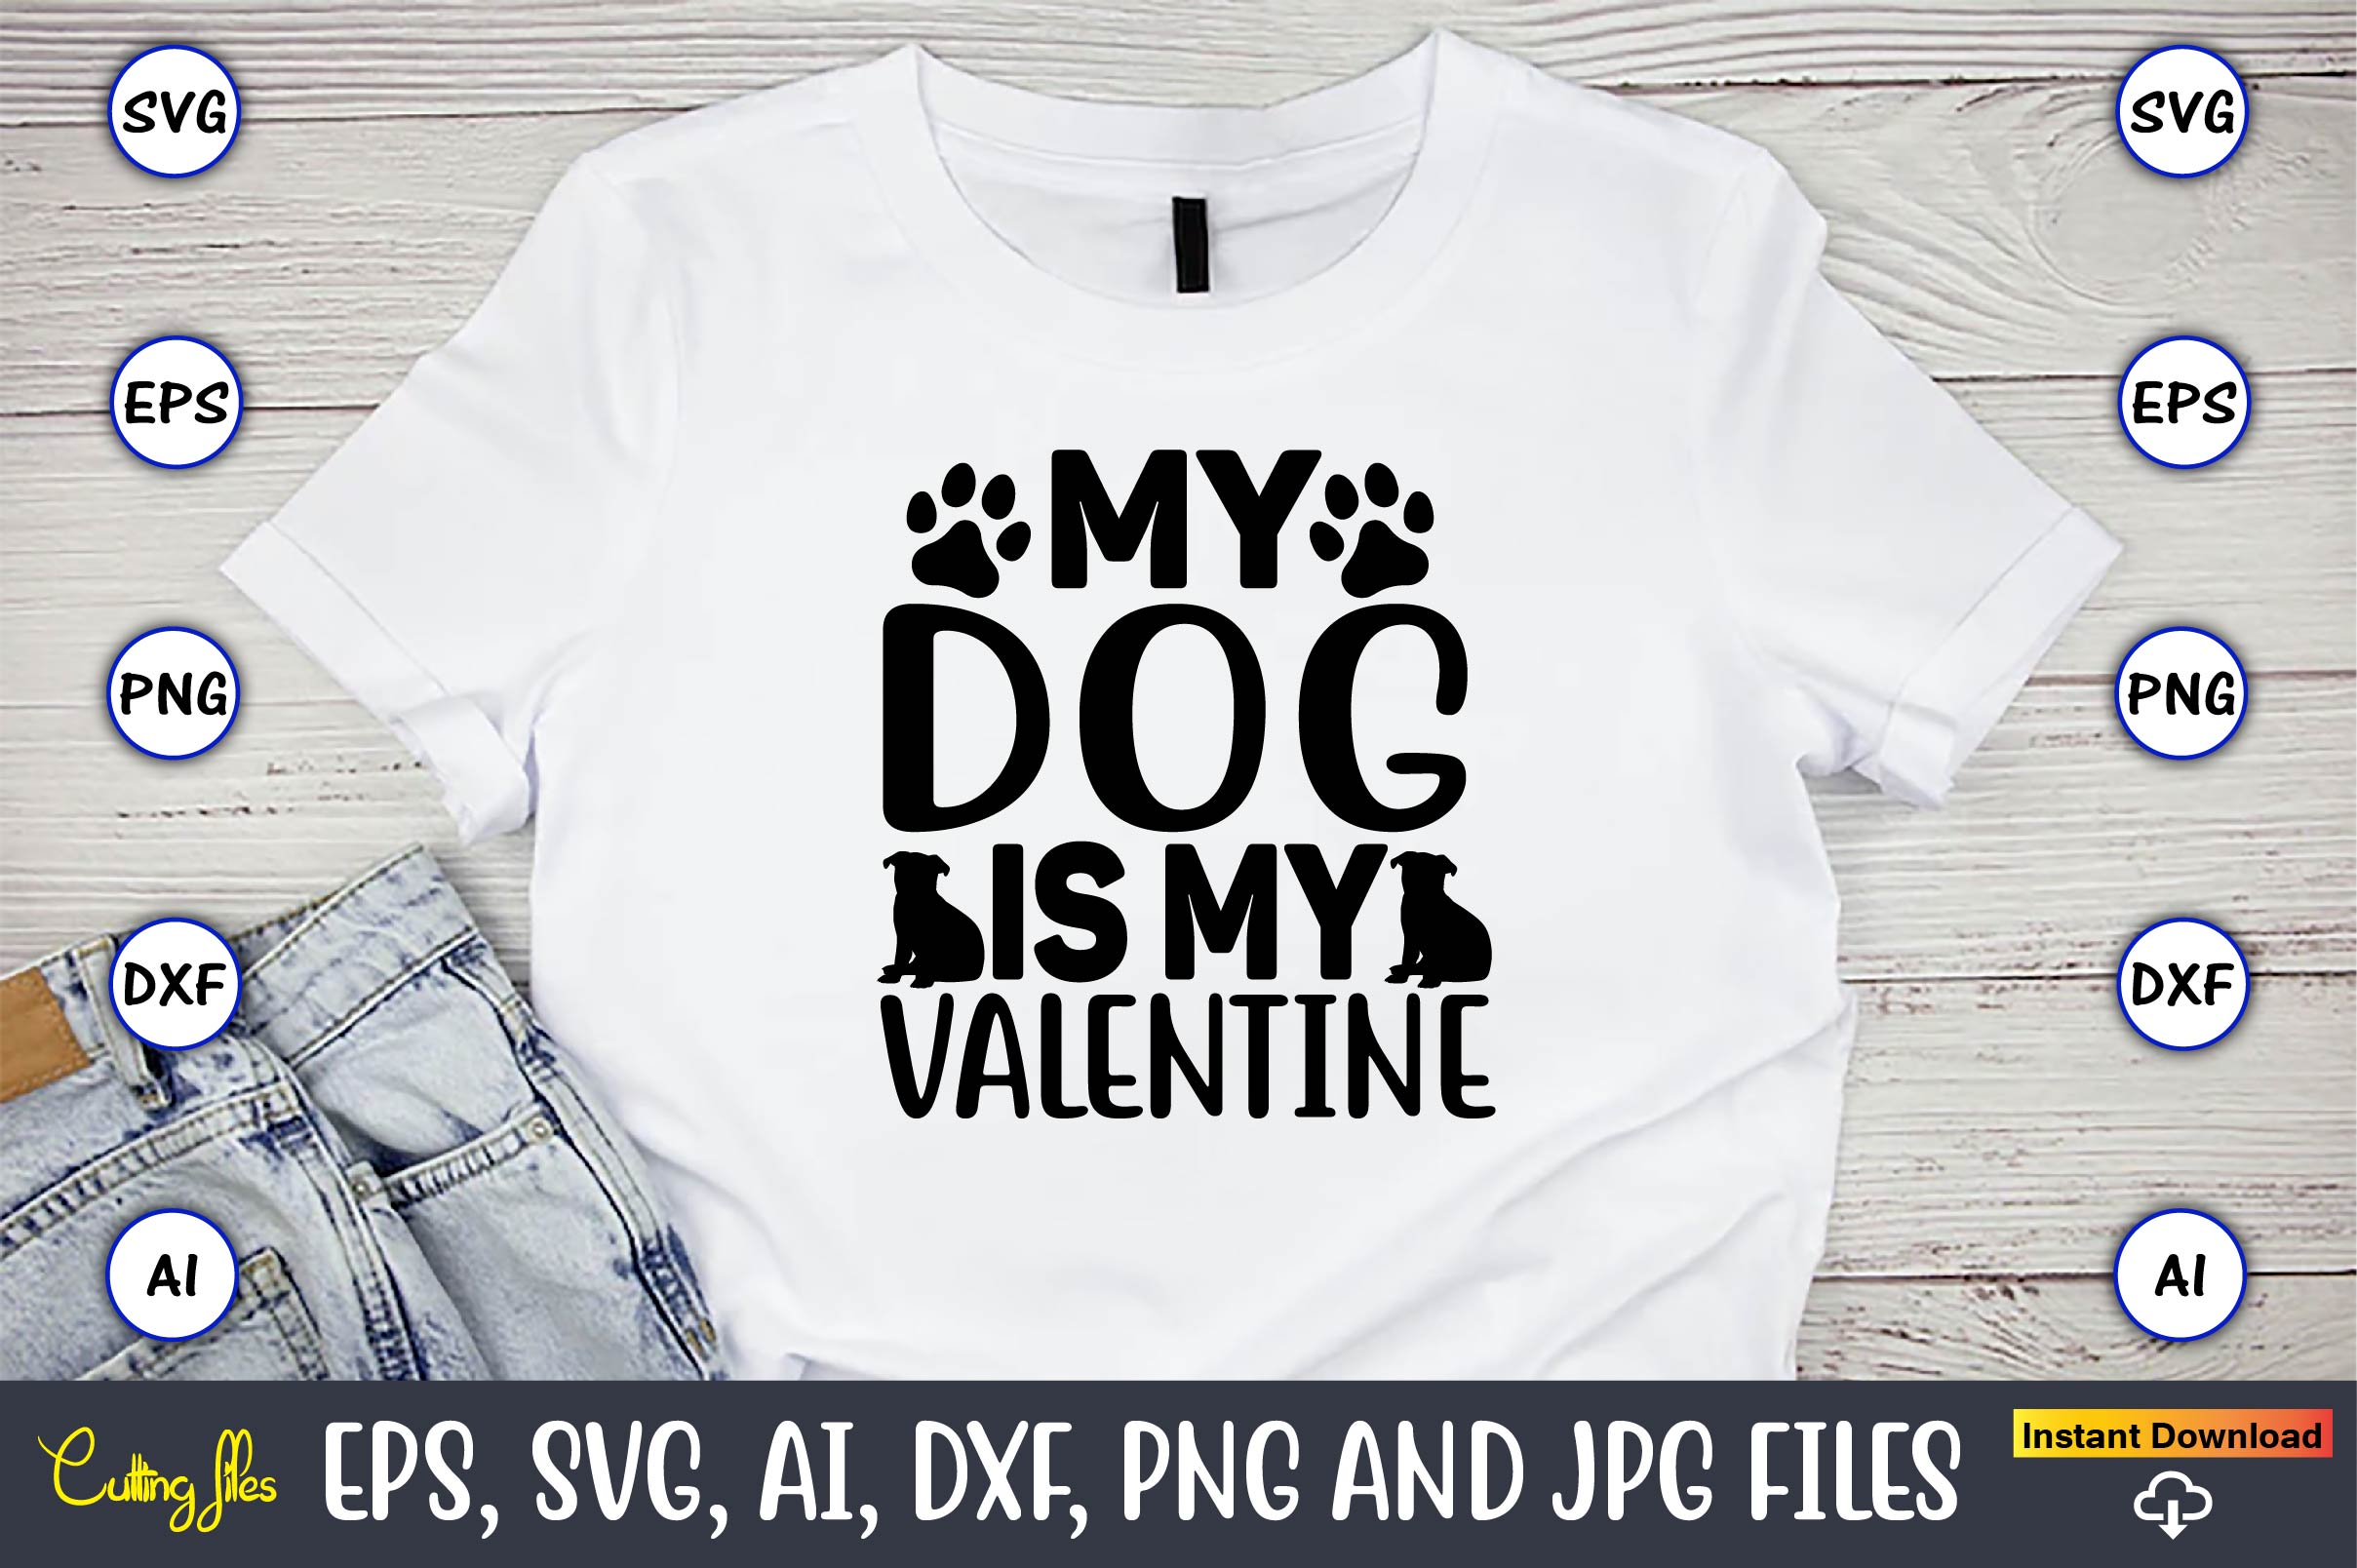 Image of a white t-shirt with a charming inscription My dog is my valentine.